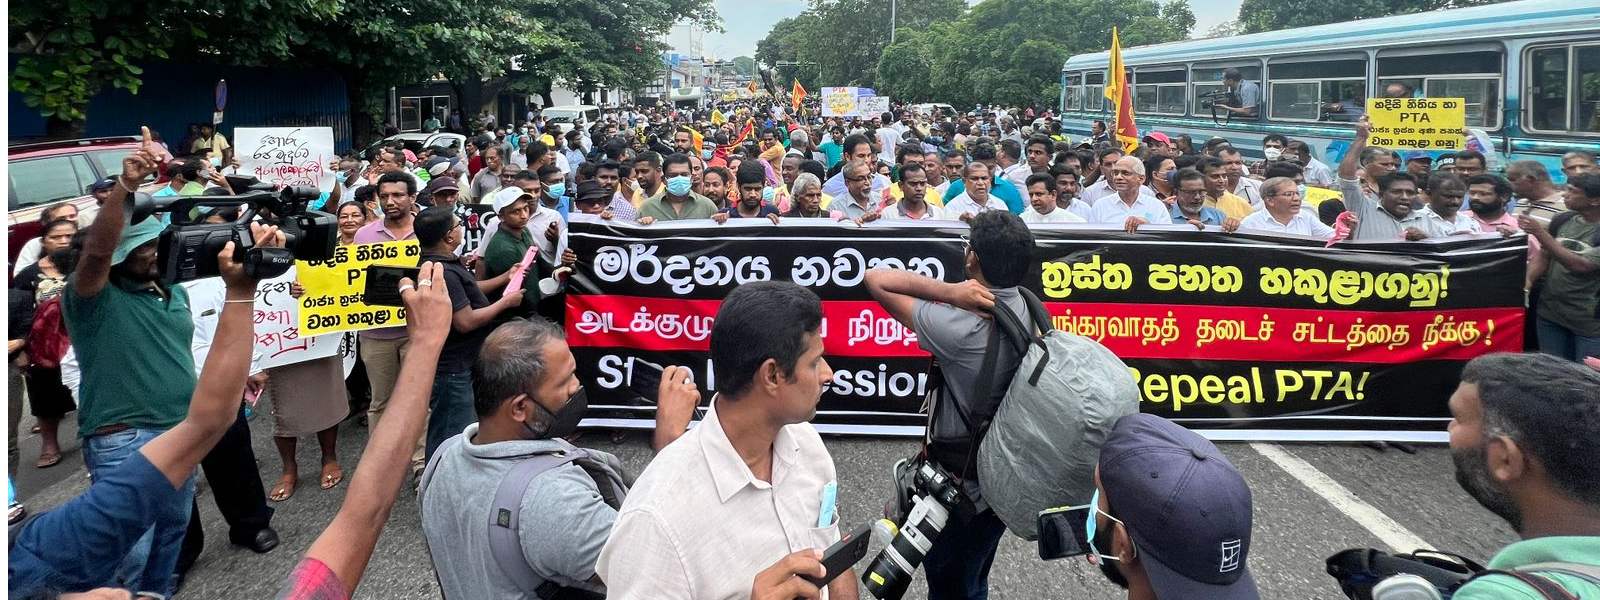 Colombo mass protest ends at the Police blockade